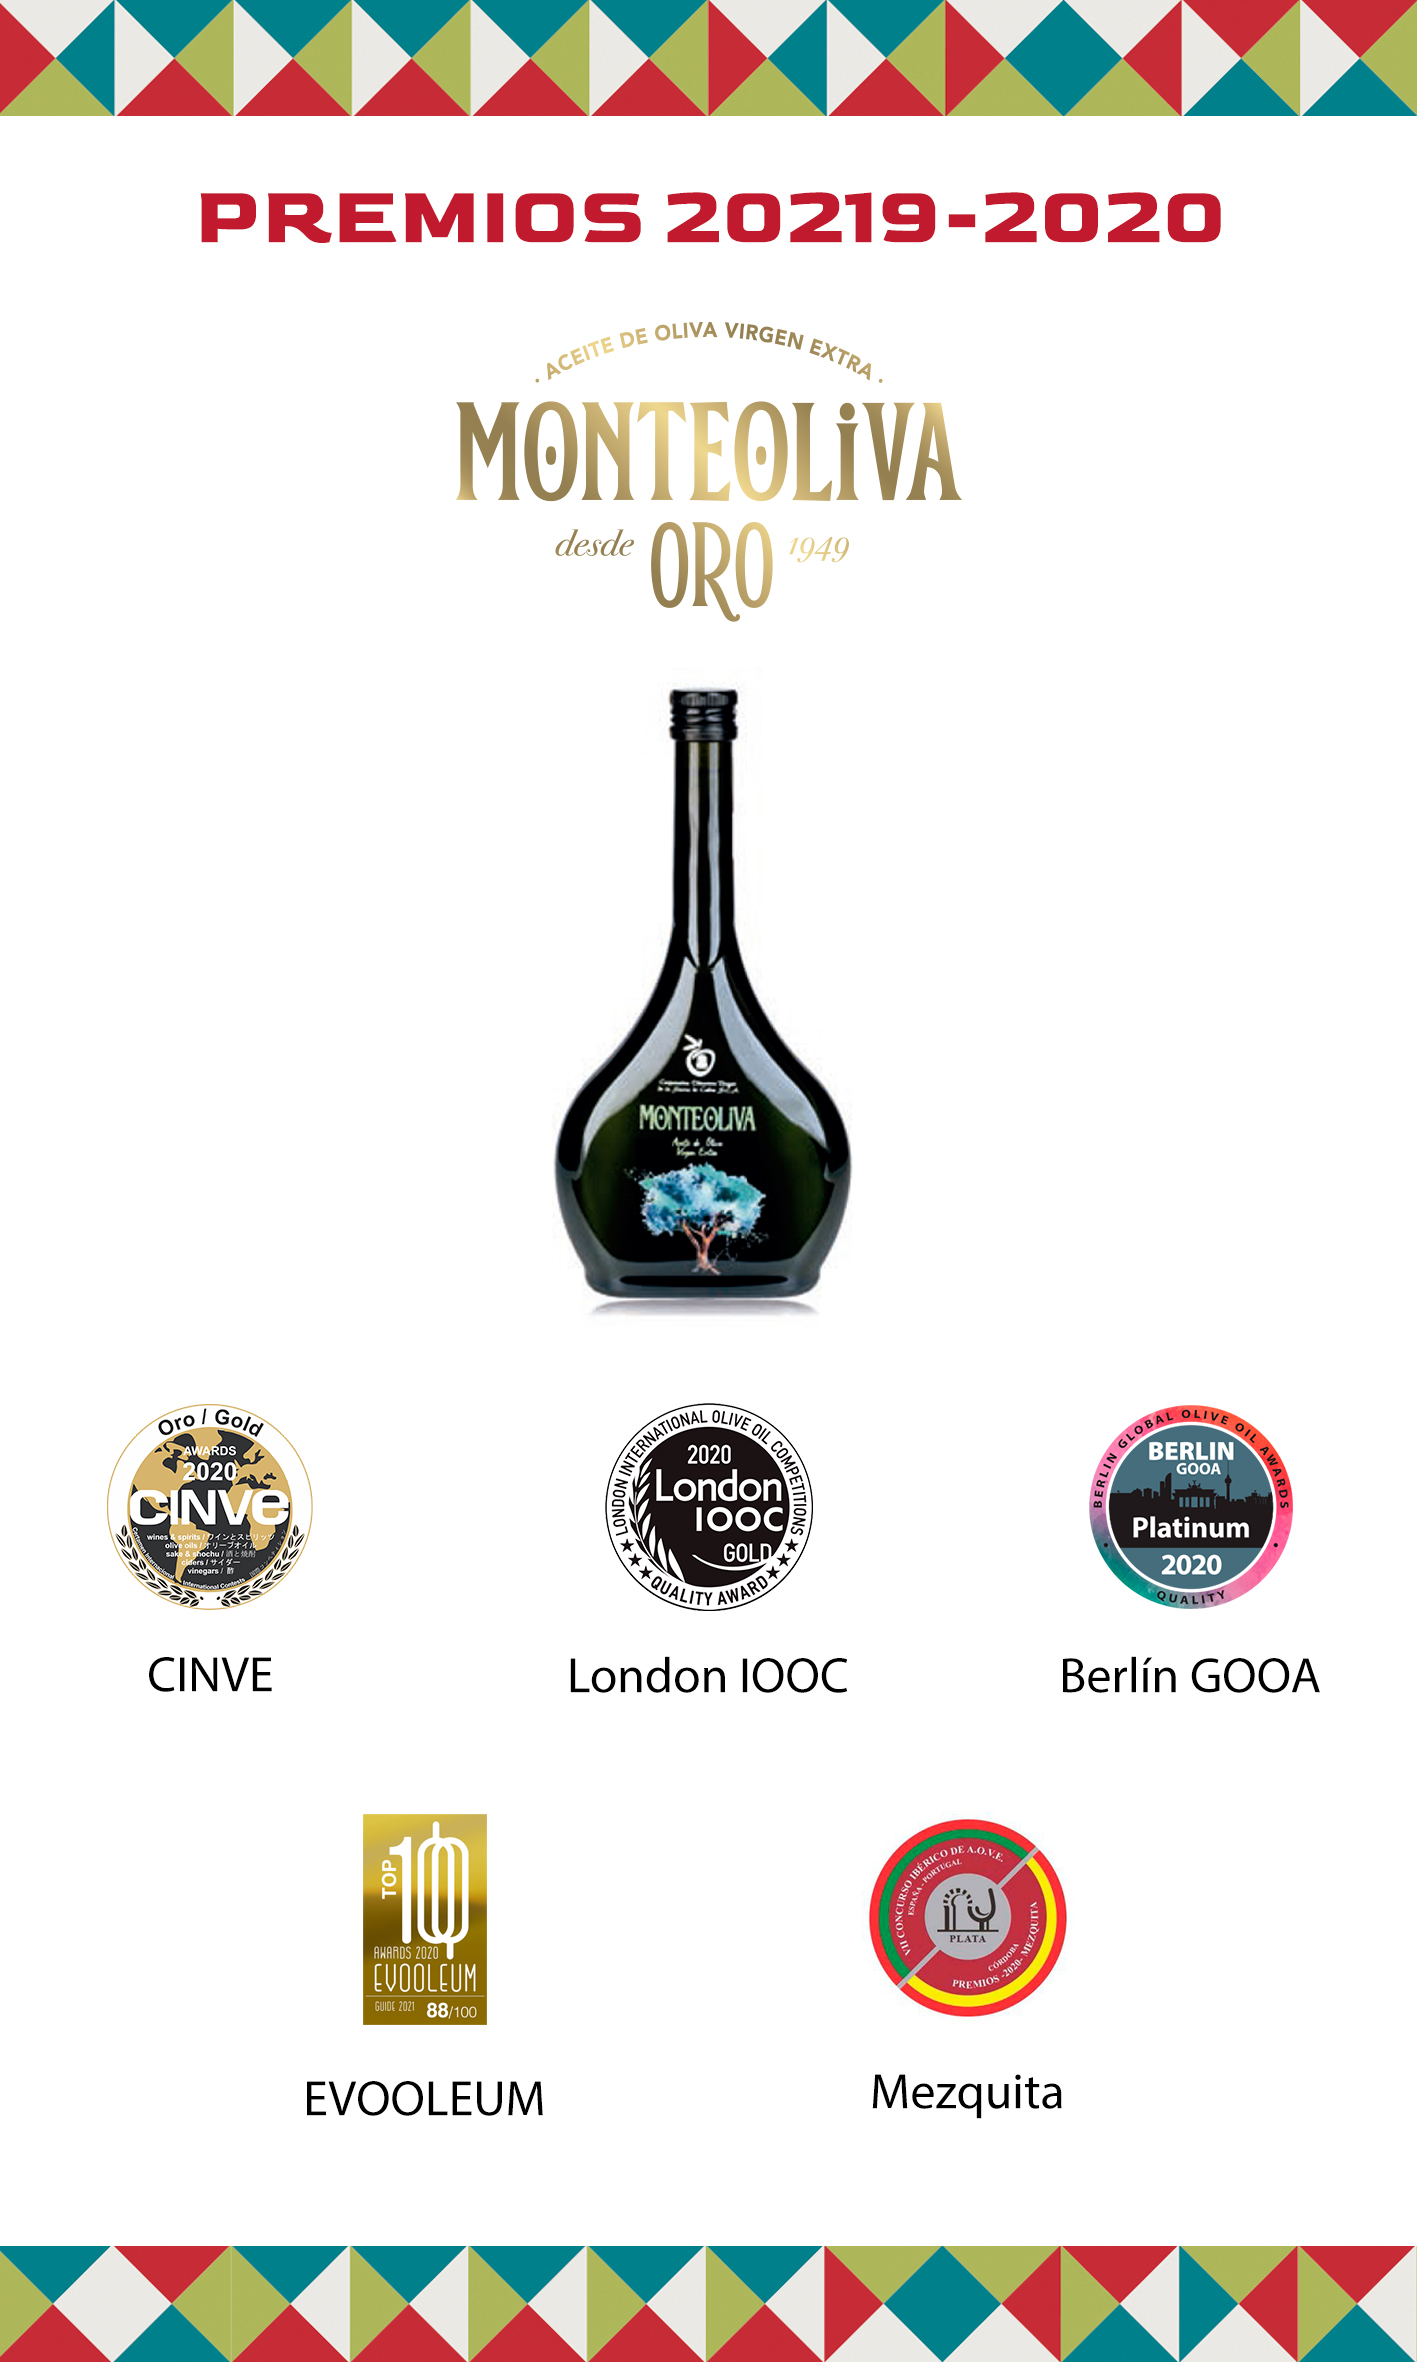 Awards received by Monteoliva oils during the year 2020 - 2